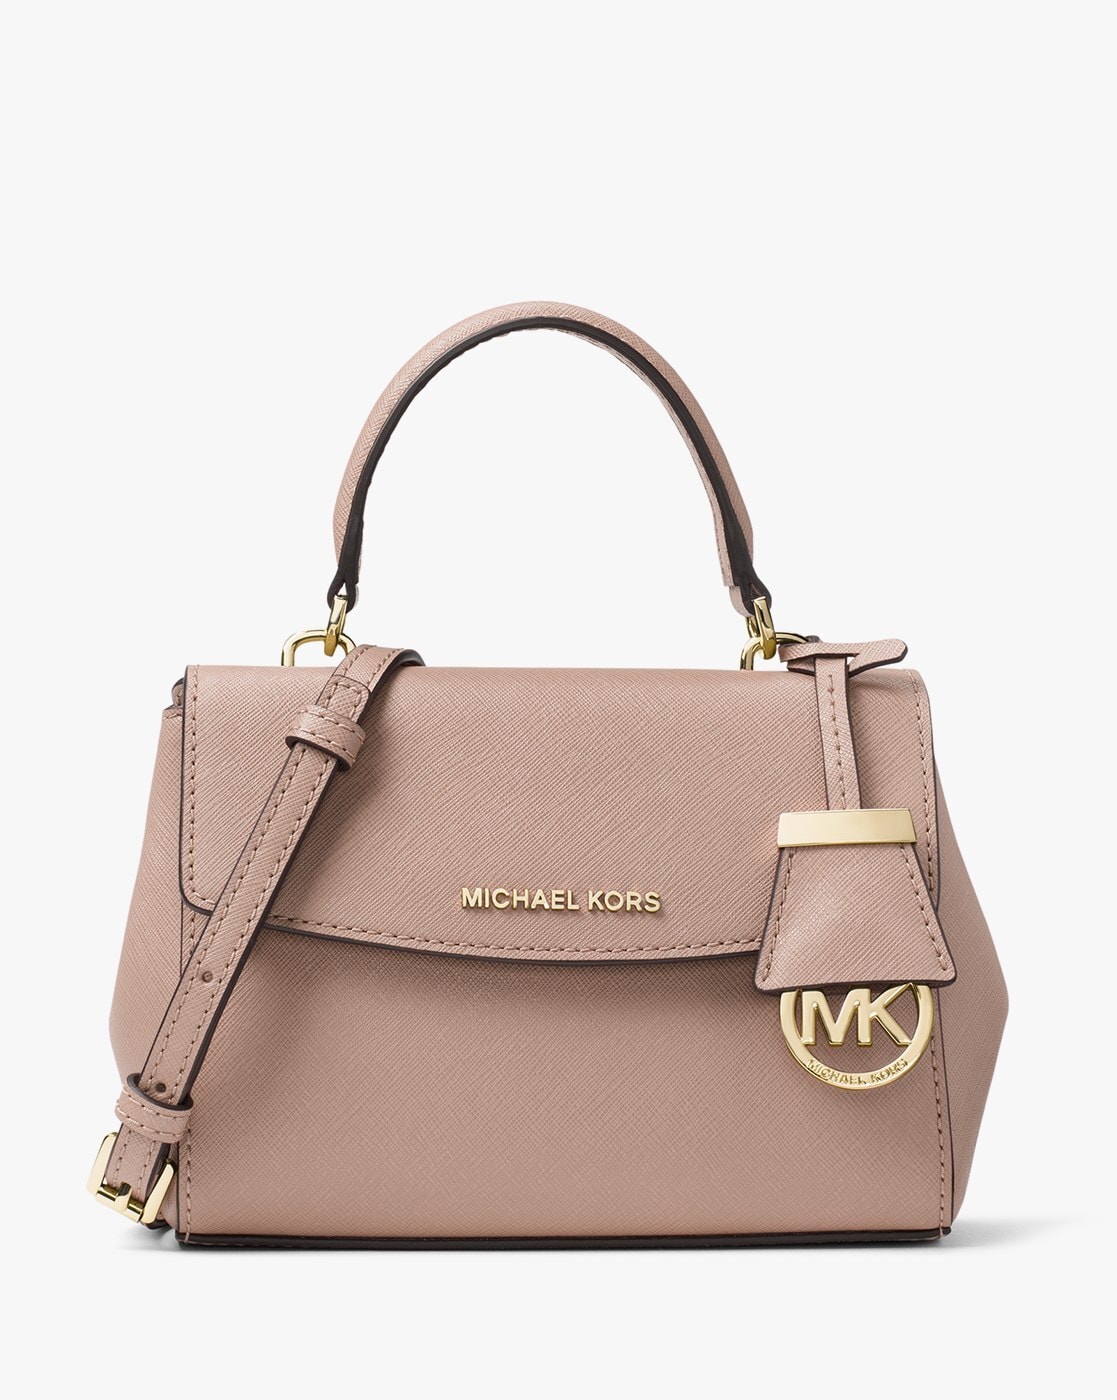 Michael Kors Ava medium & mini Ava Review and what's in my bag in